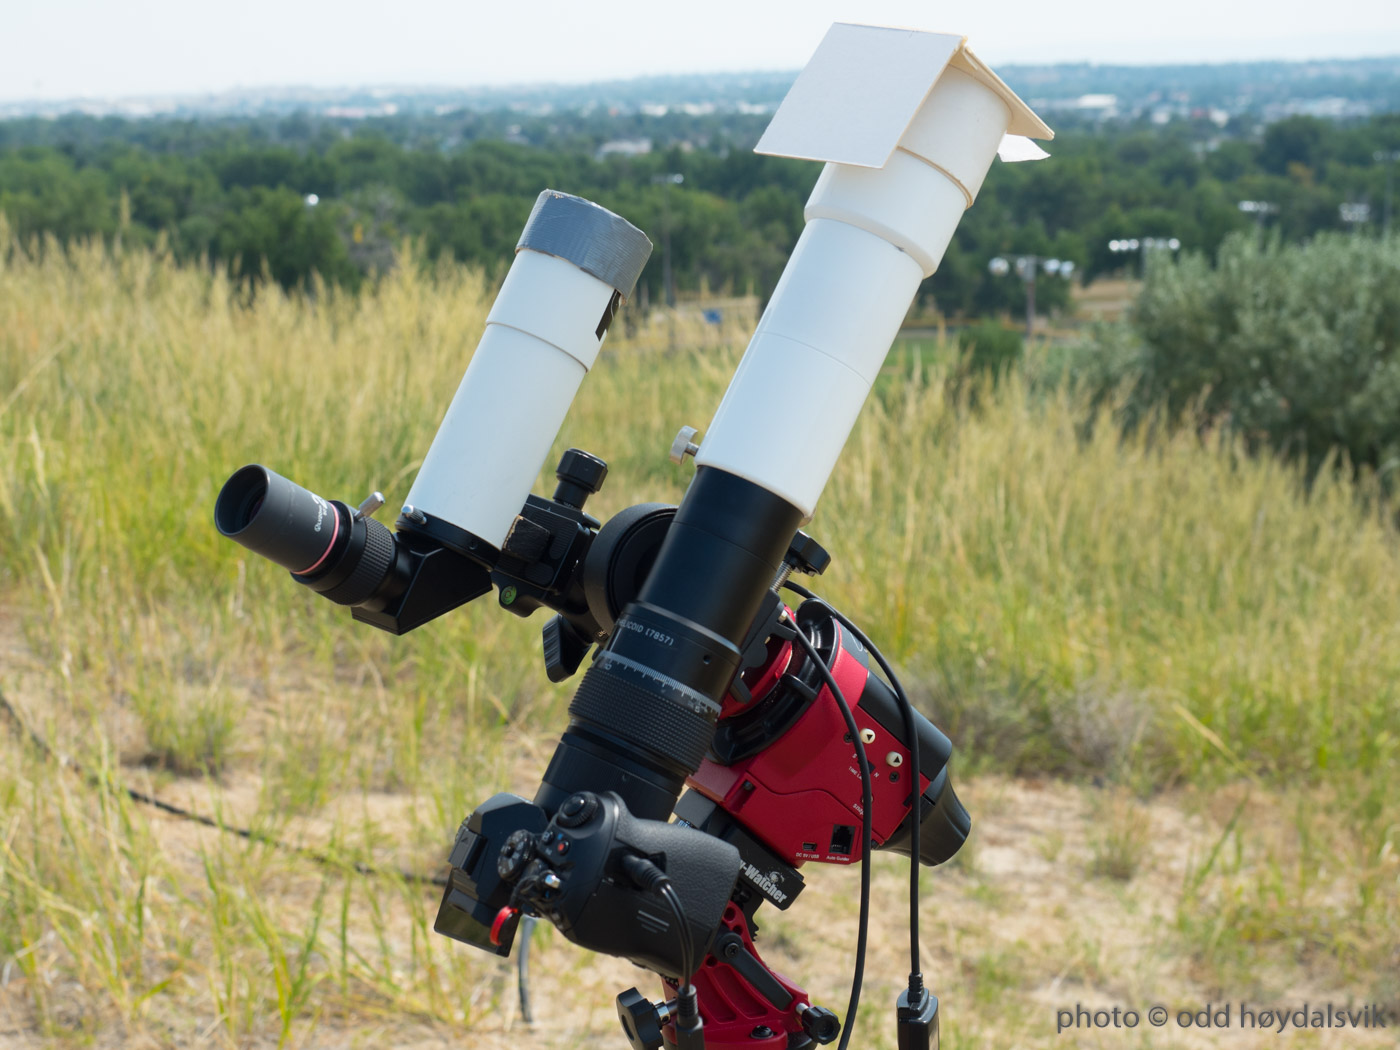 Equipment for total solar eclipse 2017